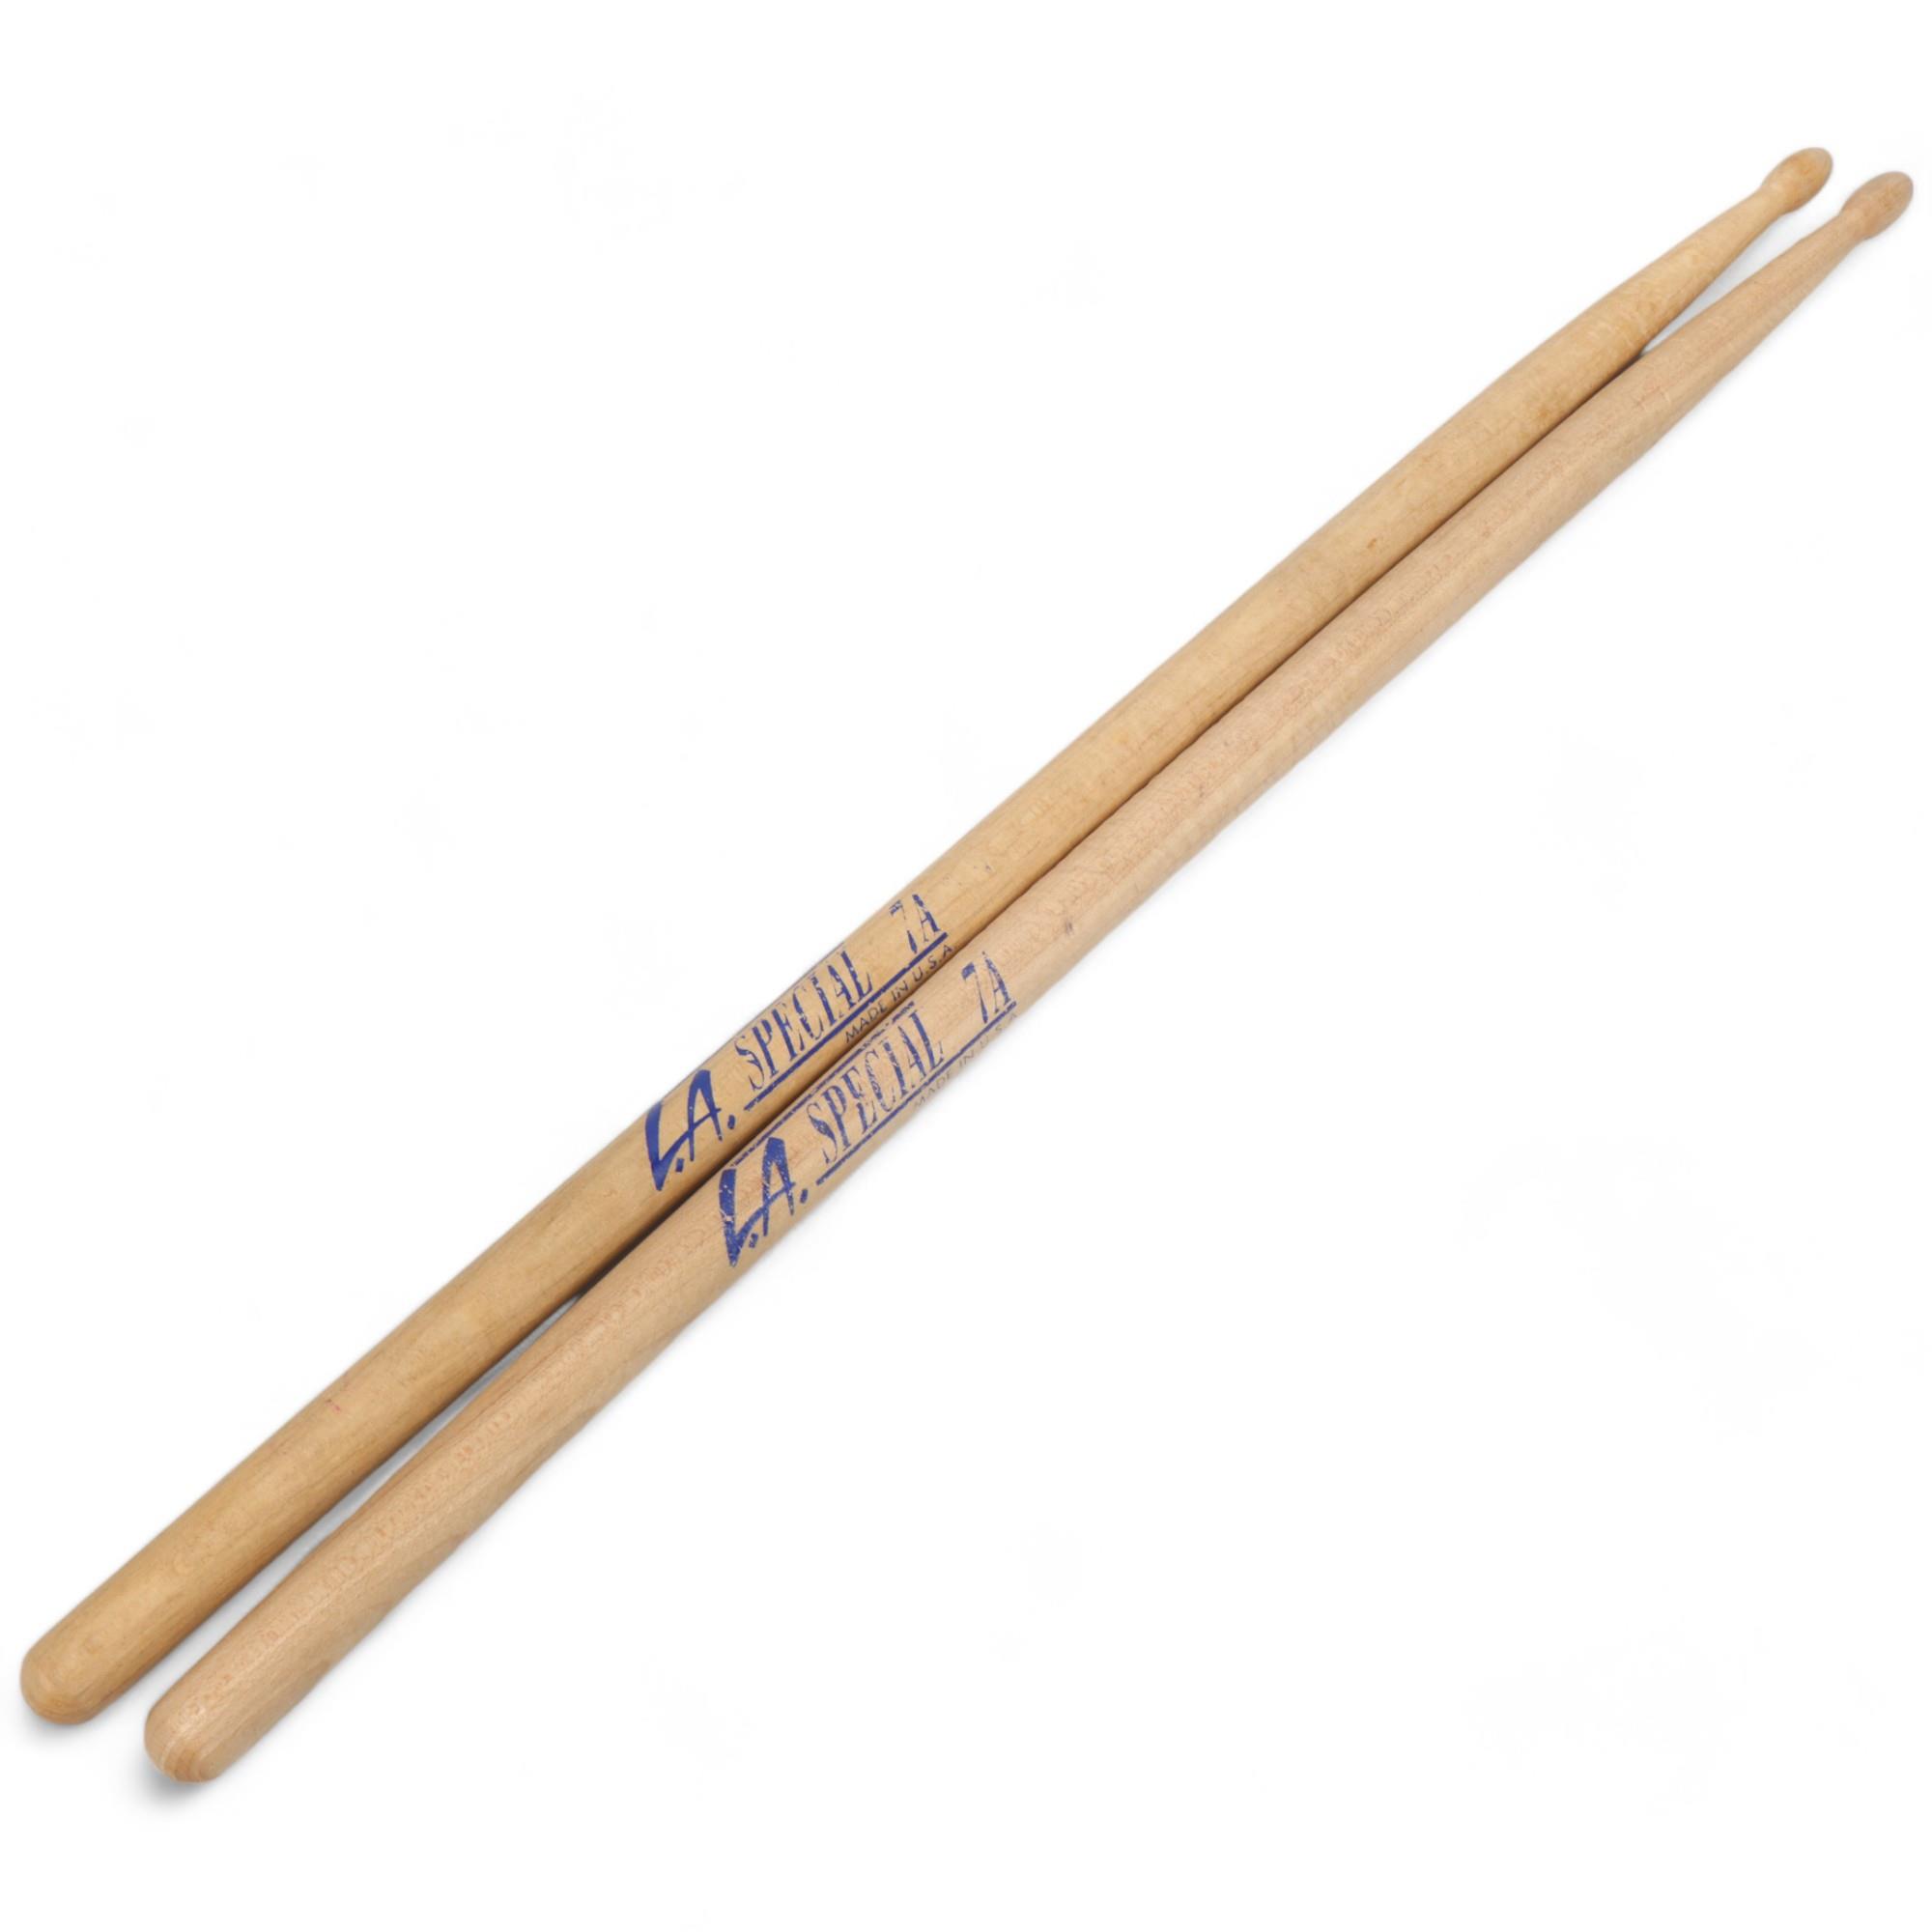 Two 'LA SPECIAL 7A' Hickory DRUMSTICKS belonging to MITCH MITCHELL.